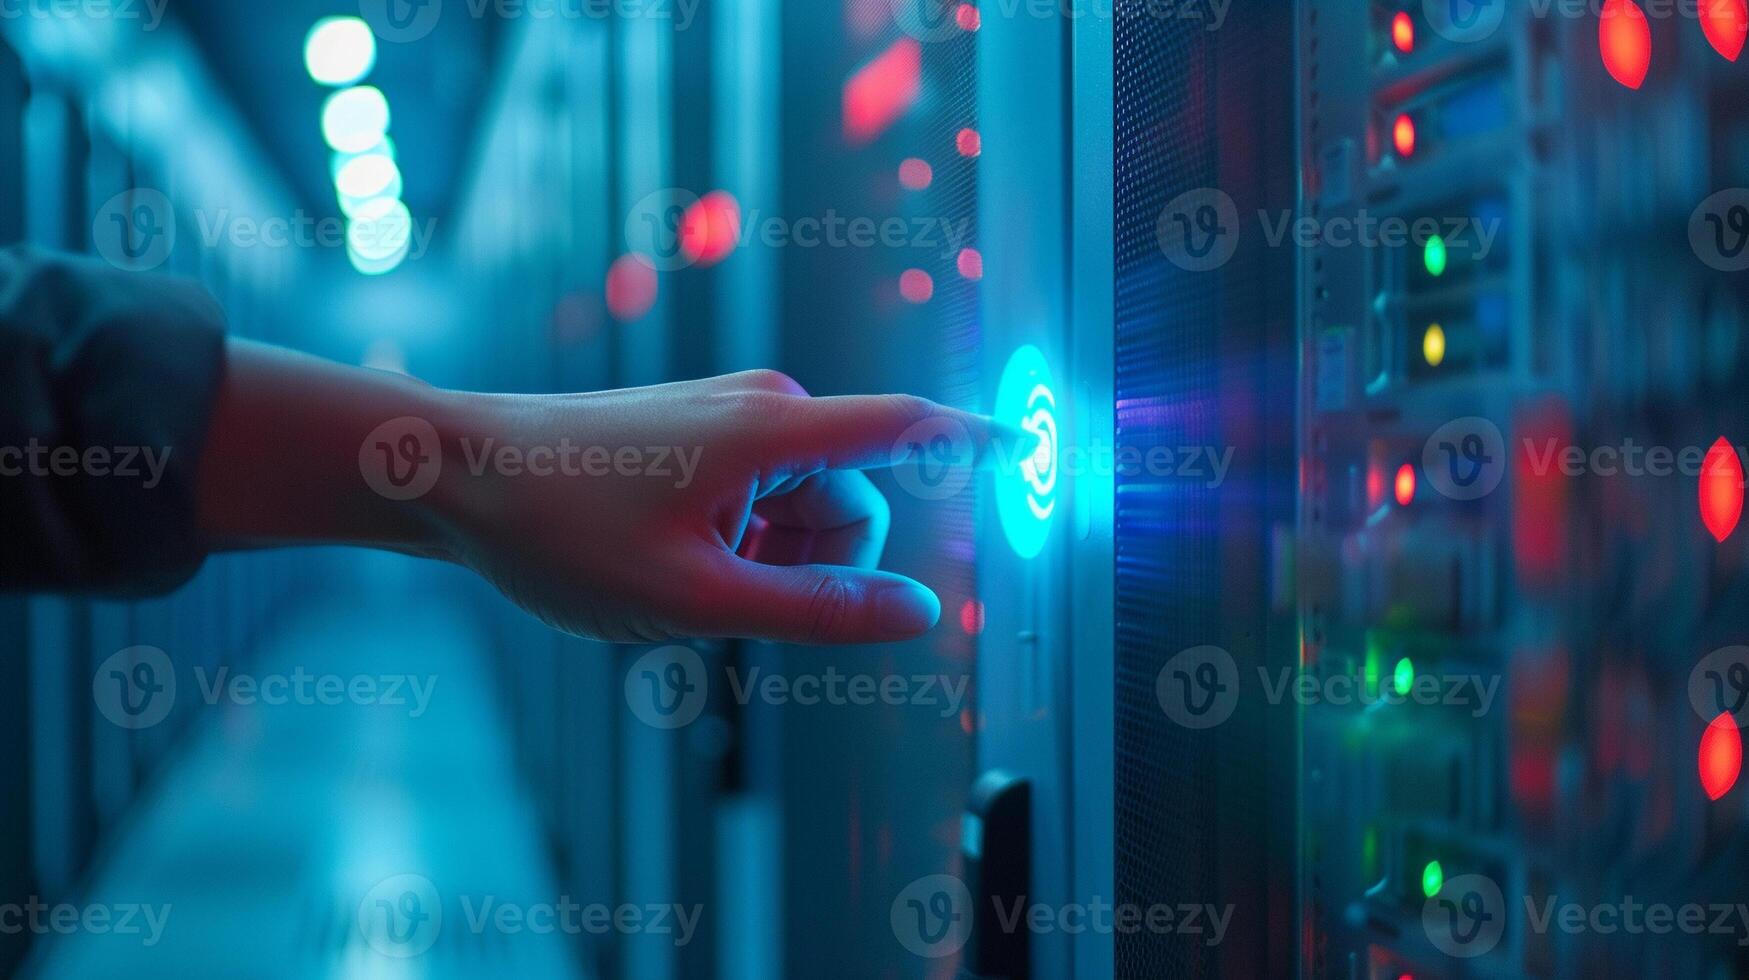 AI generated A close-up security professional's hand undergoing biometric scanning to gain access to a high-security data center. In the blurred background, rows of server racks with flickering photo